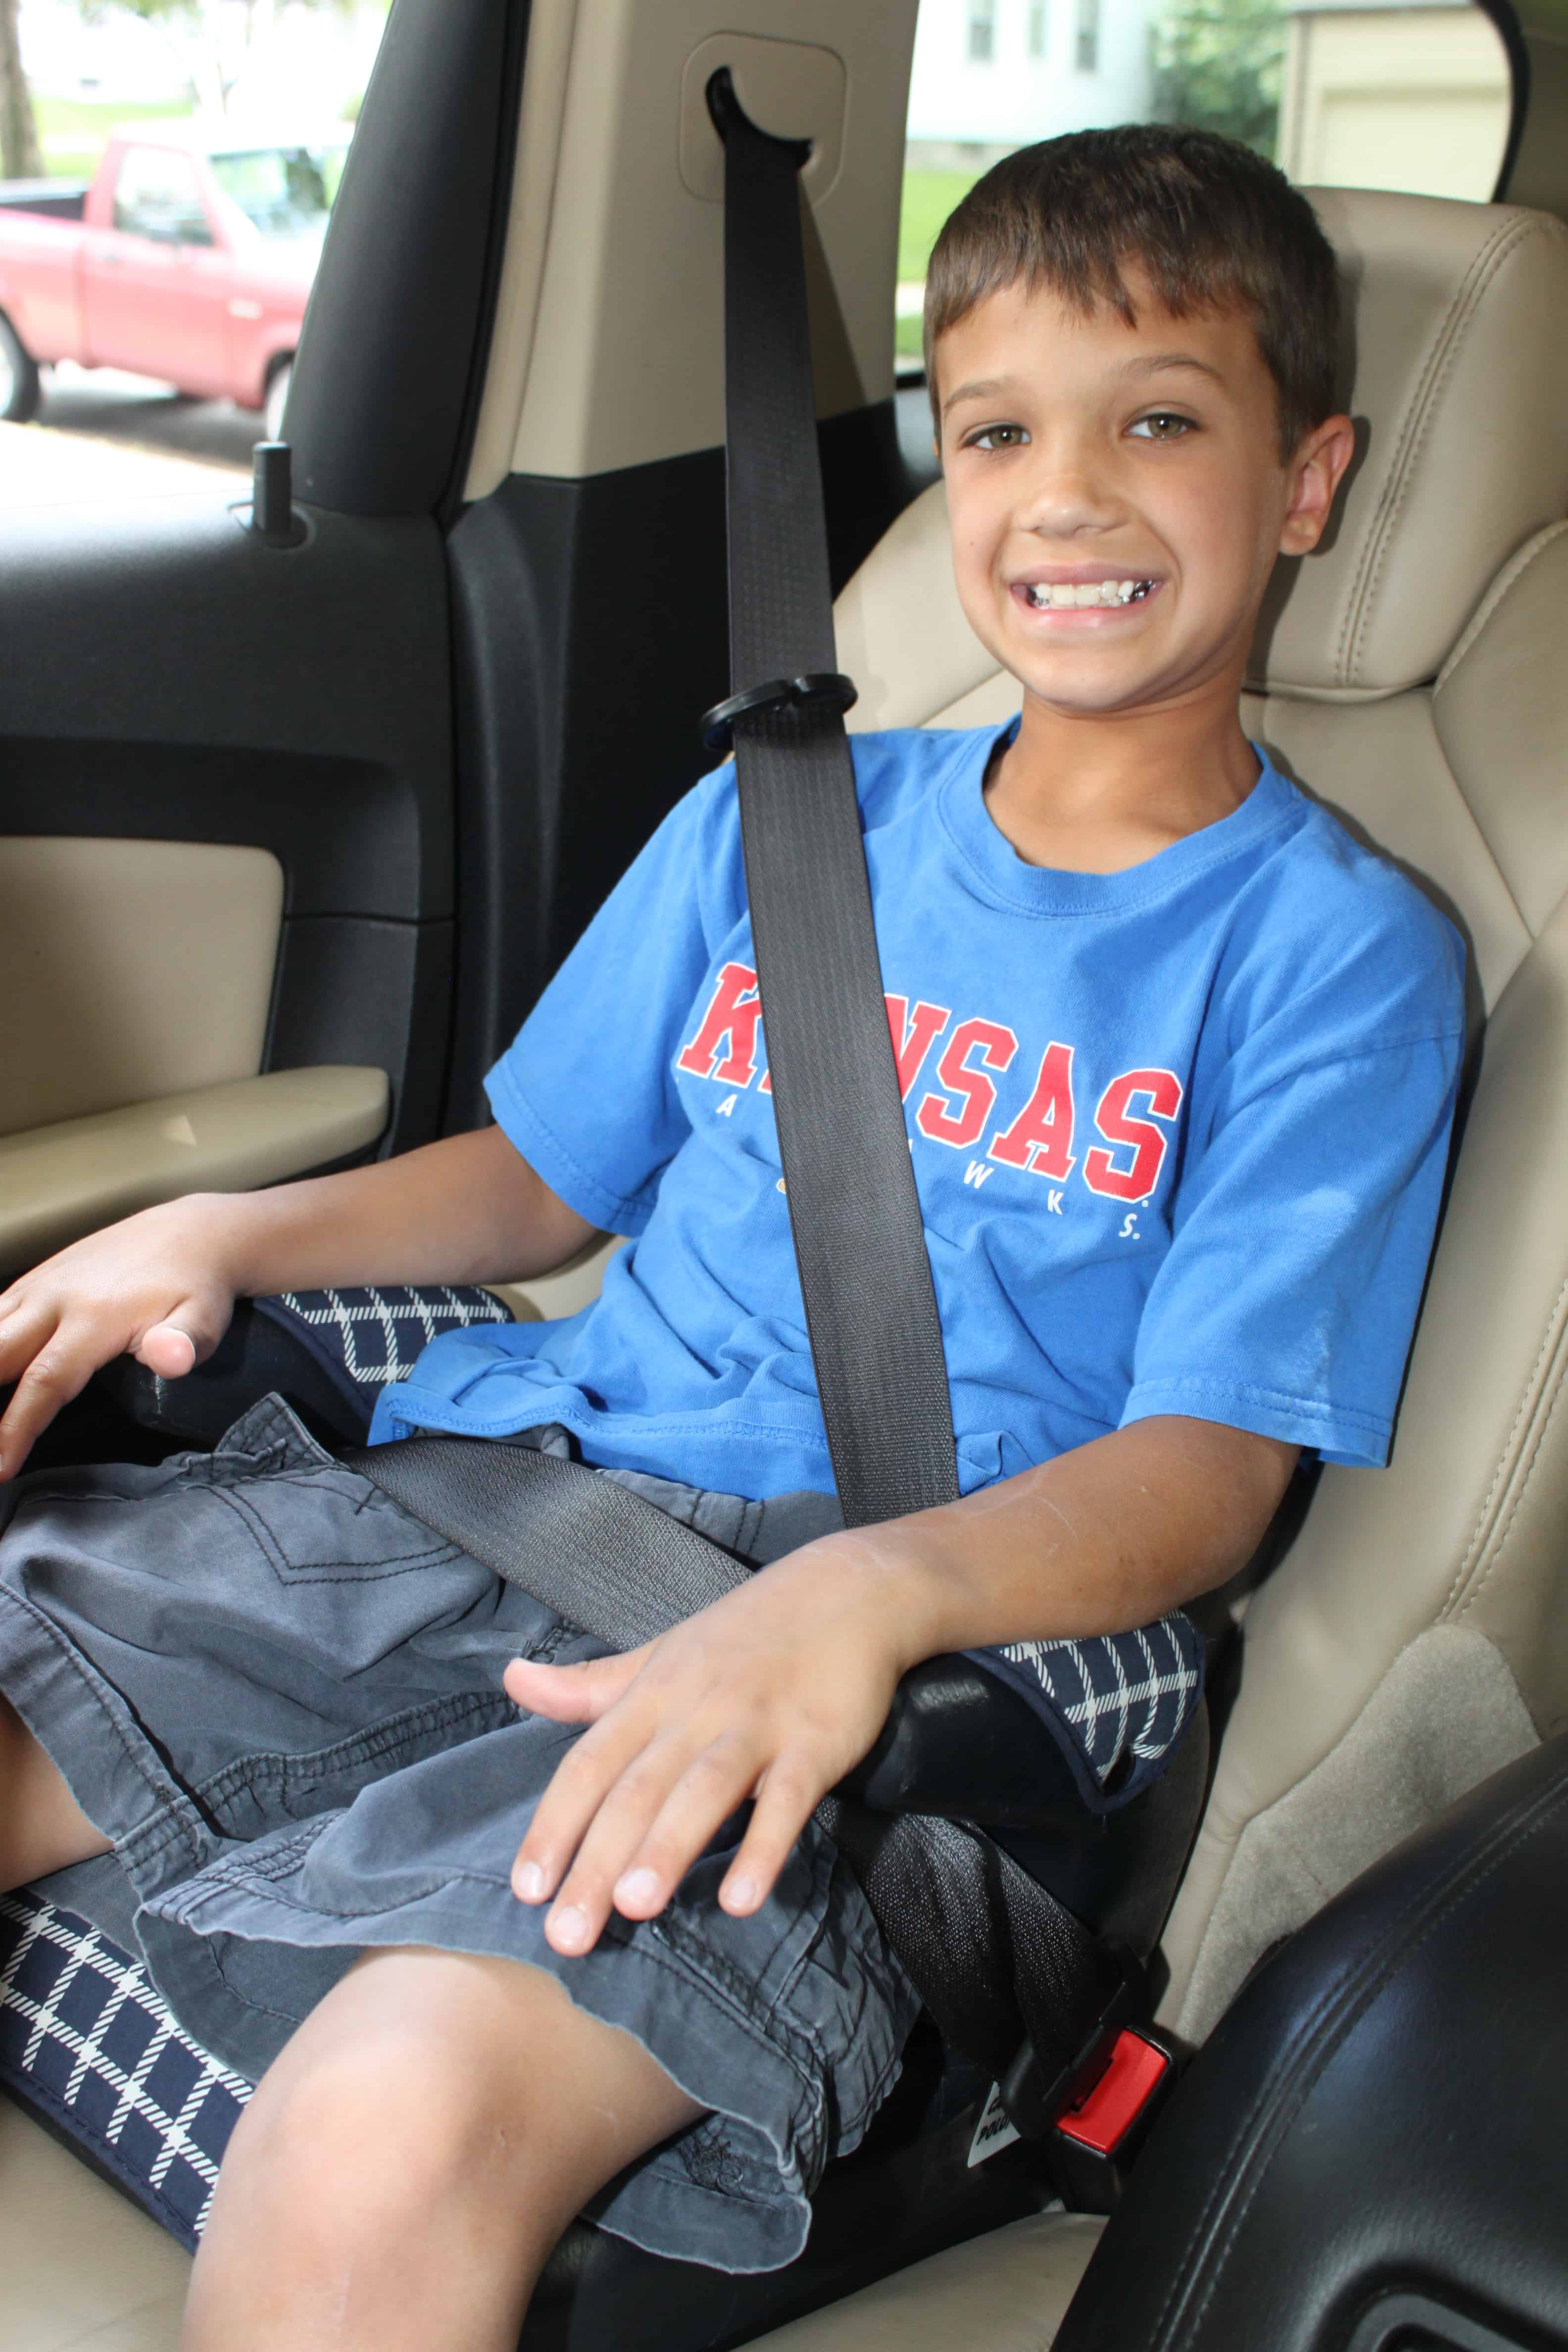 Car Seats, Booster Seats, and Seat Belts